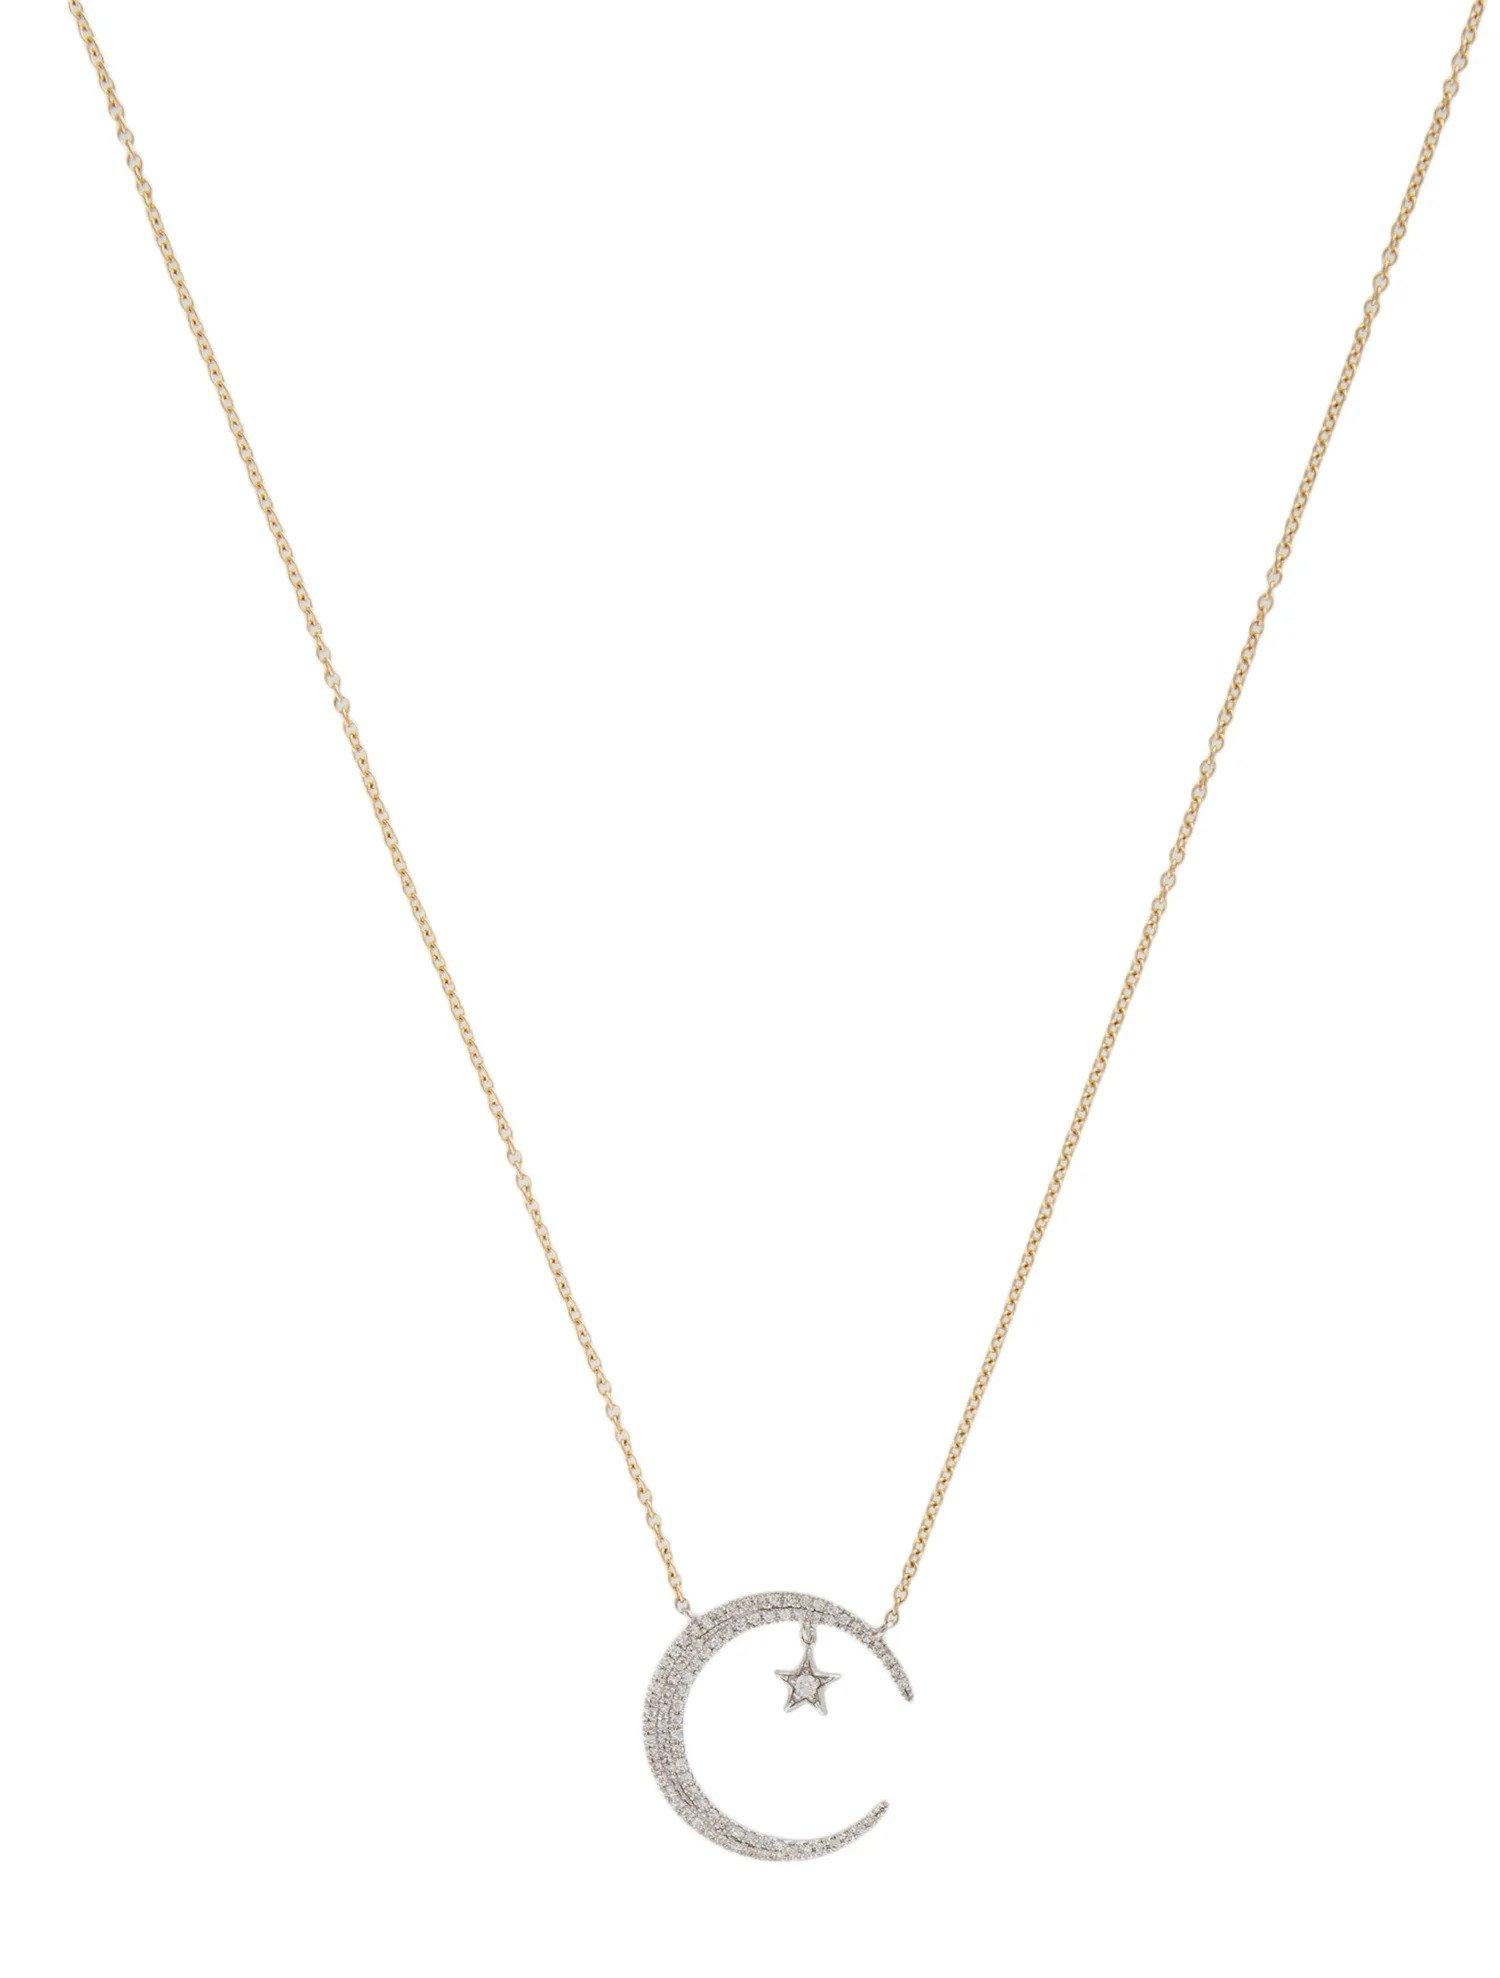 0.25 Carat Diamond Crescent Moon and Star White & Yellow Gold Pendant Necklace In New Condition For Sale In Great Neck, NY